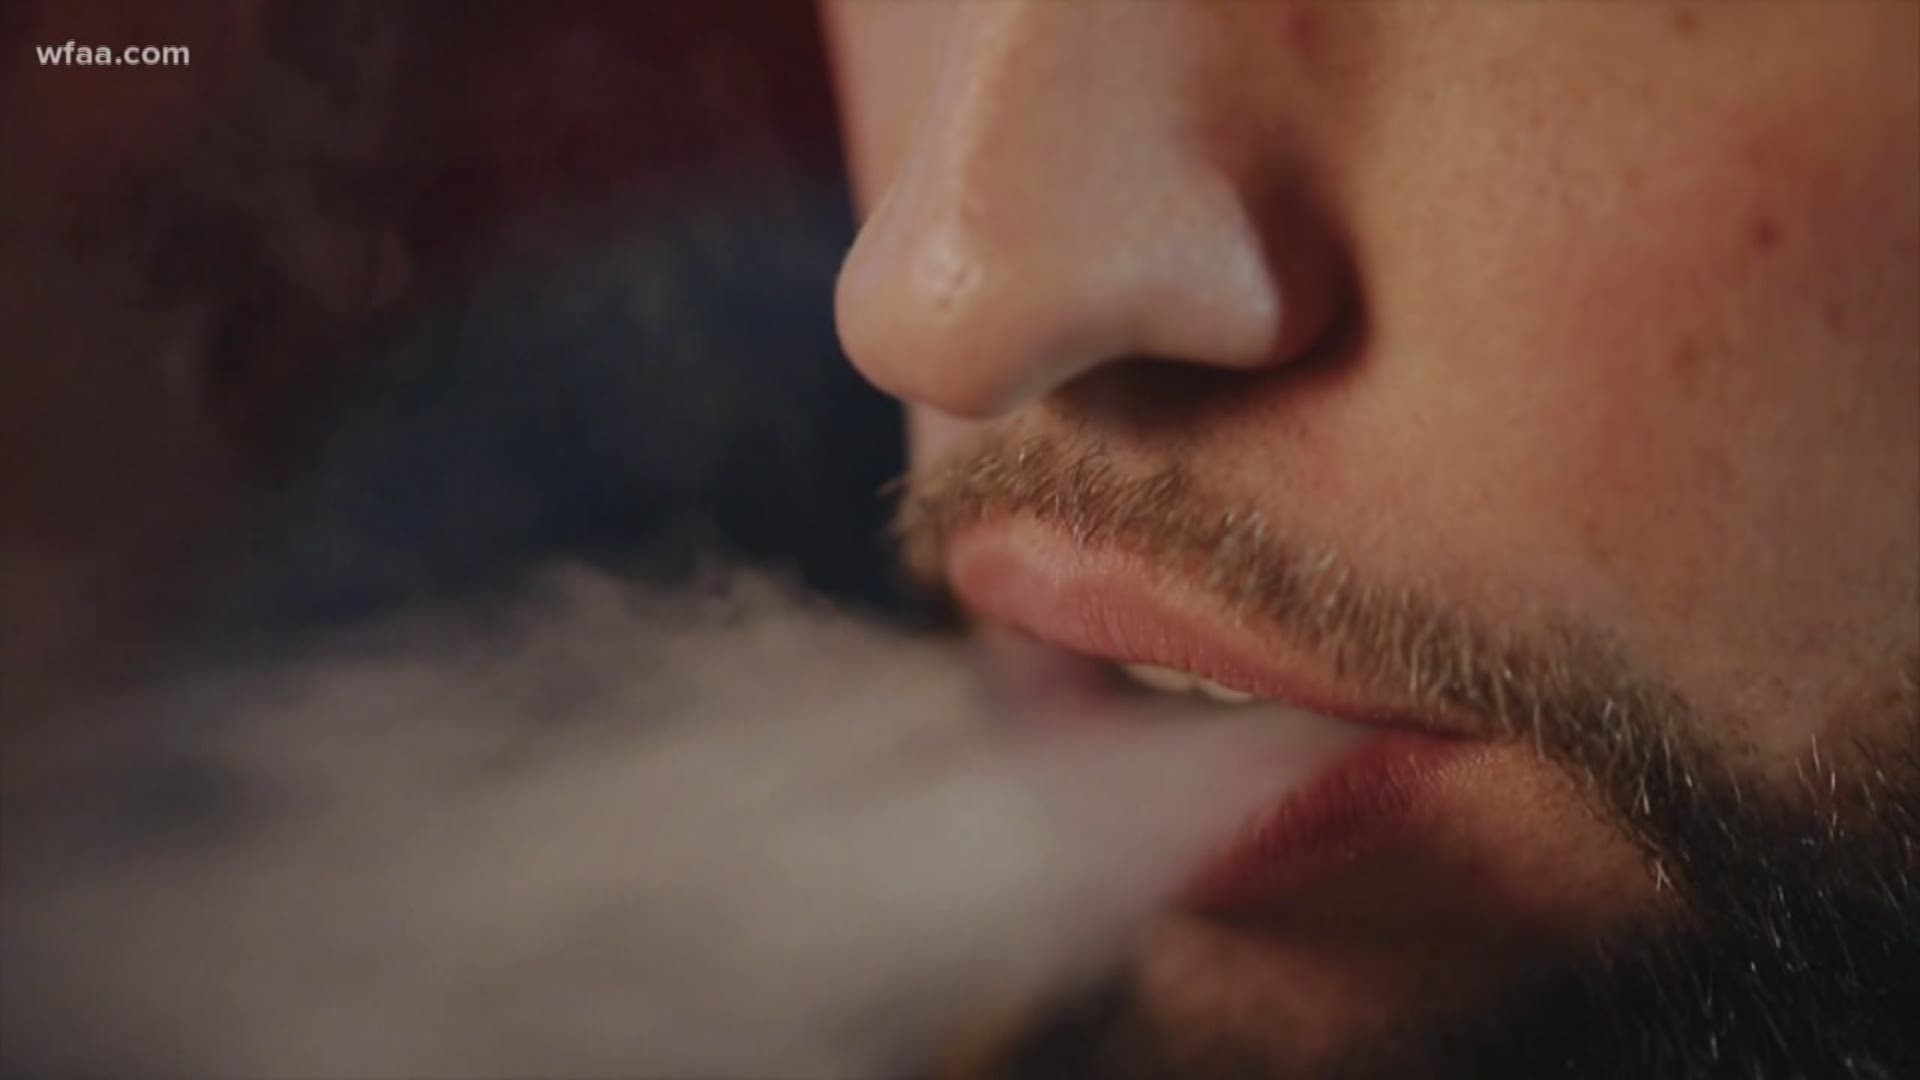 The CDC held a briefing Friday after health officials said the death of an Illinois patient could be linked to vaping. This would be the first death in the United States tied to the smoking alternative, officials say. The CDC is tracking 193 cases of severe lung illnesses potentially associated with e-cigarettes and vaping in 23 different states, including Texas.